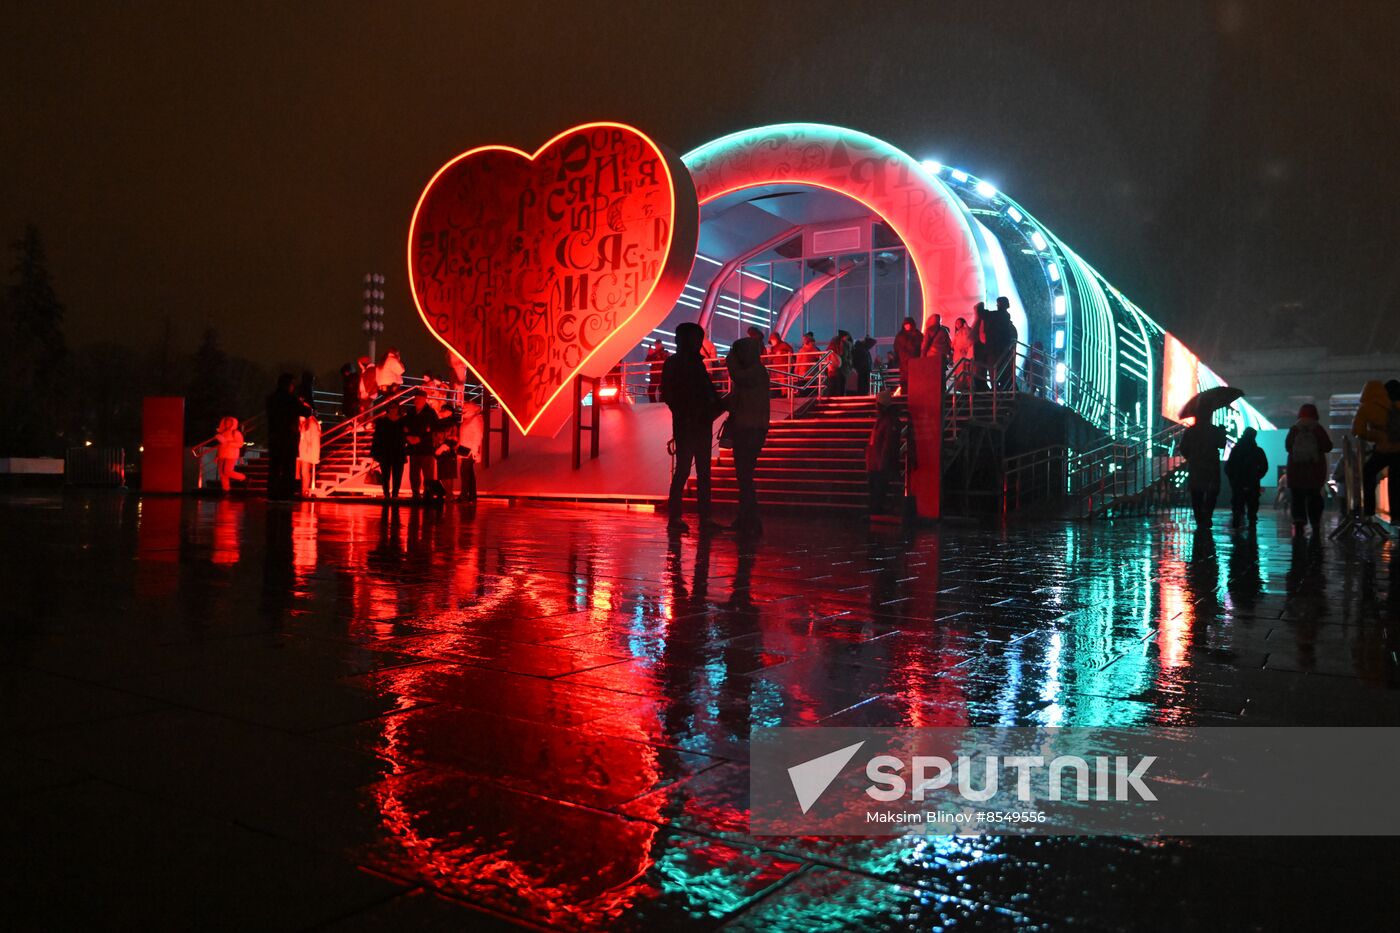 International RUSSIA EXPO Forum and Exhibition. VDNKh illuminated for opening ceremony